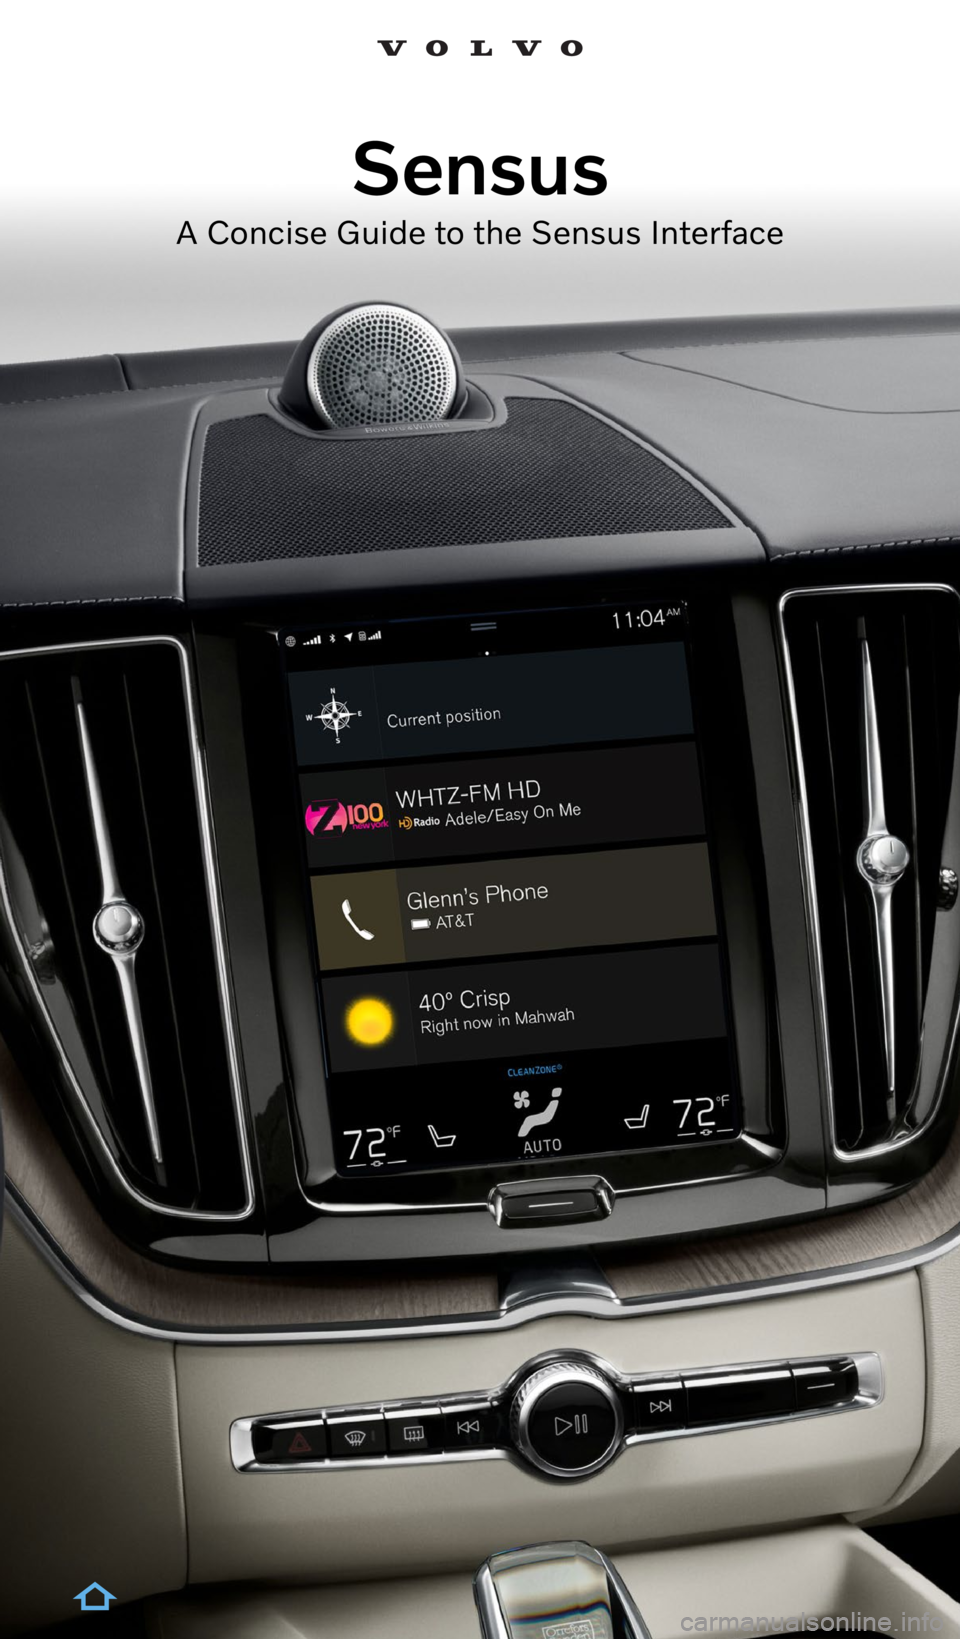 VOLVO XC40 2022  Sensus Digital Guide Sensus
A Concise Guide to the Sensus Interface  